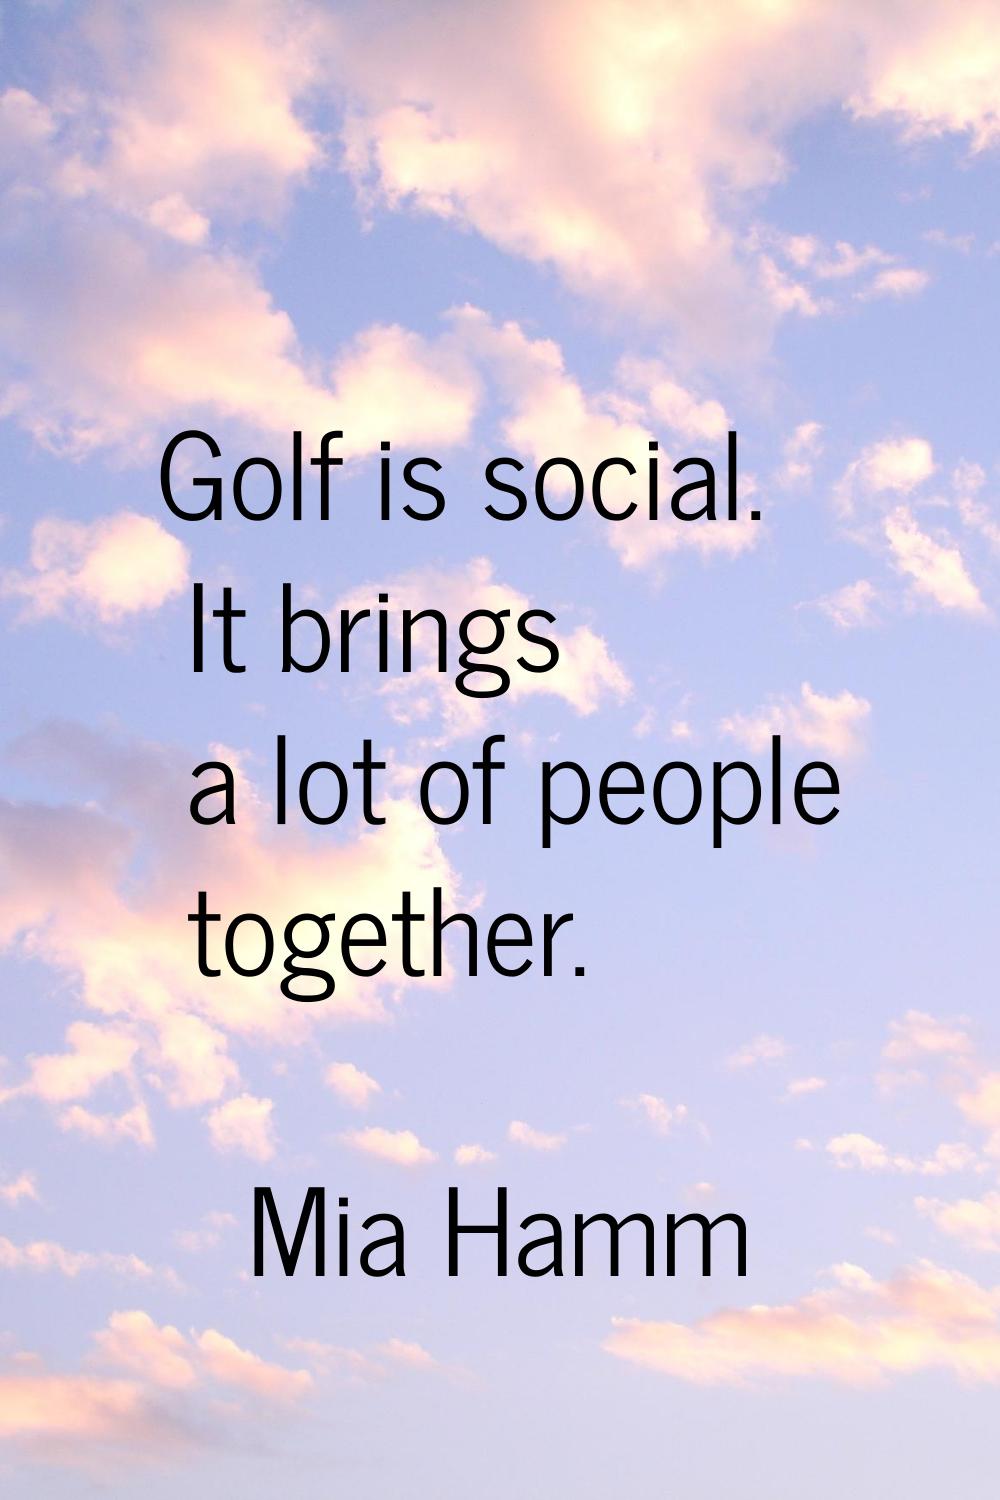 Golf is social. It brings a lot of people together.